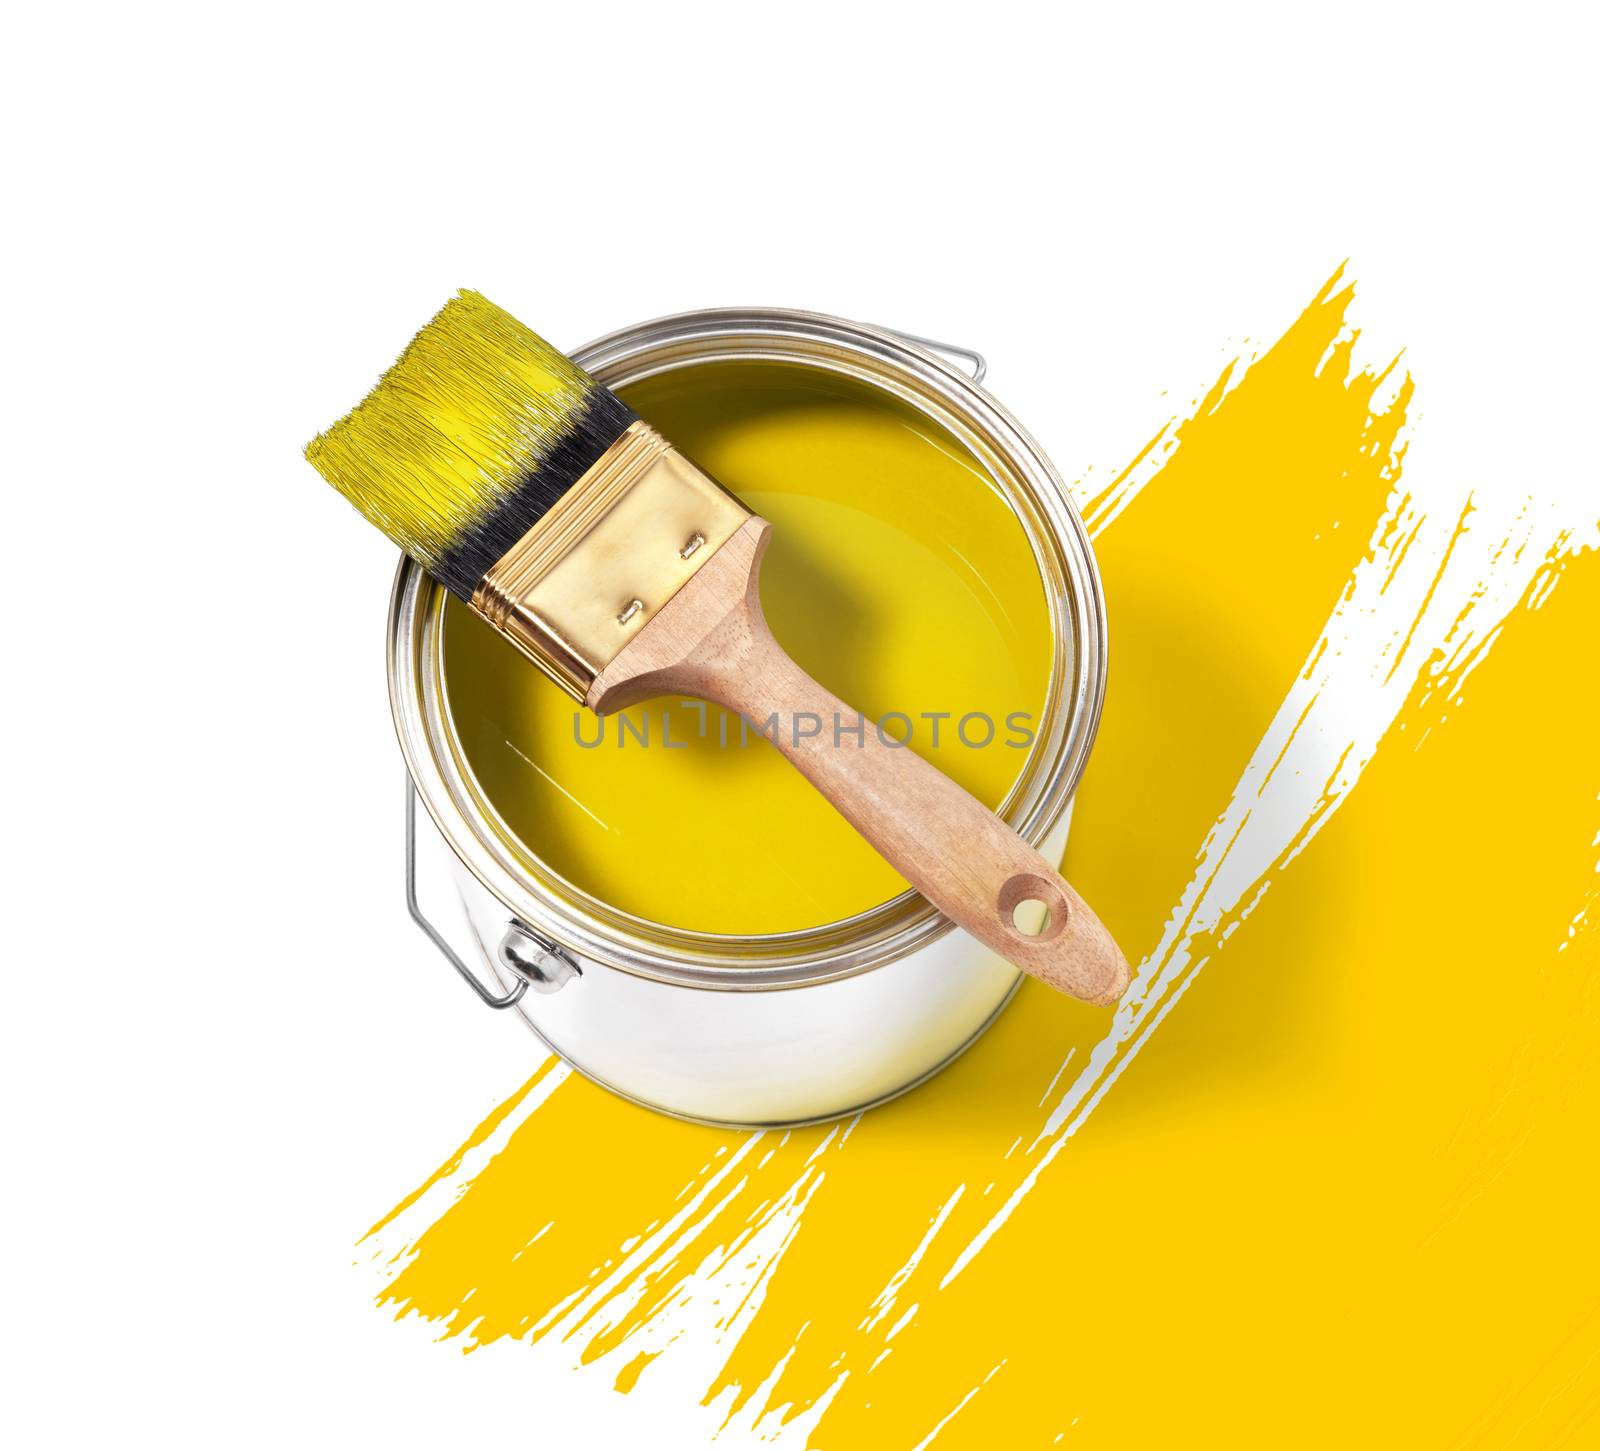 Yellow paint tin can with brush on top on a white background with yellow strokes by janssenkruseproductions